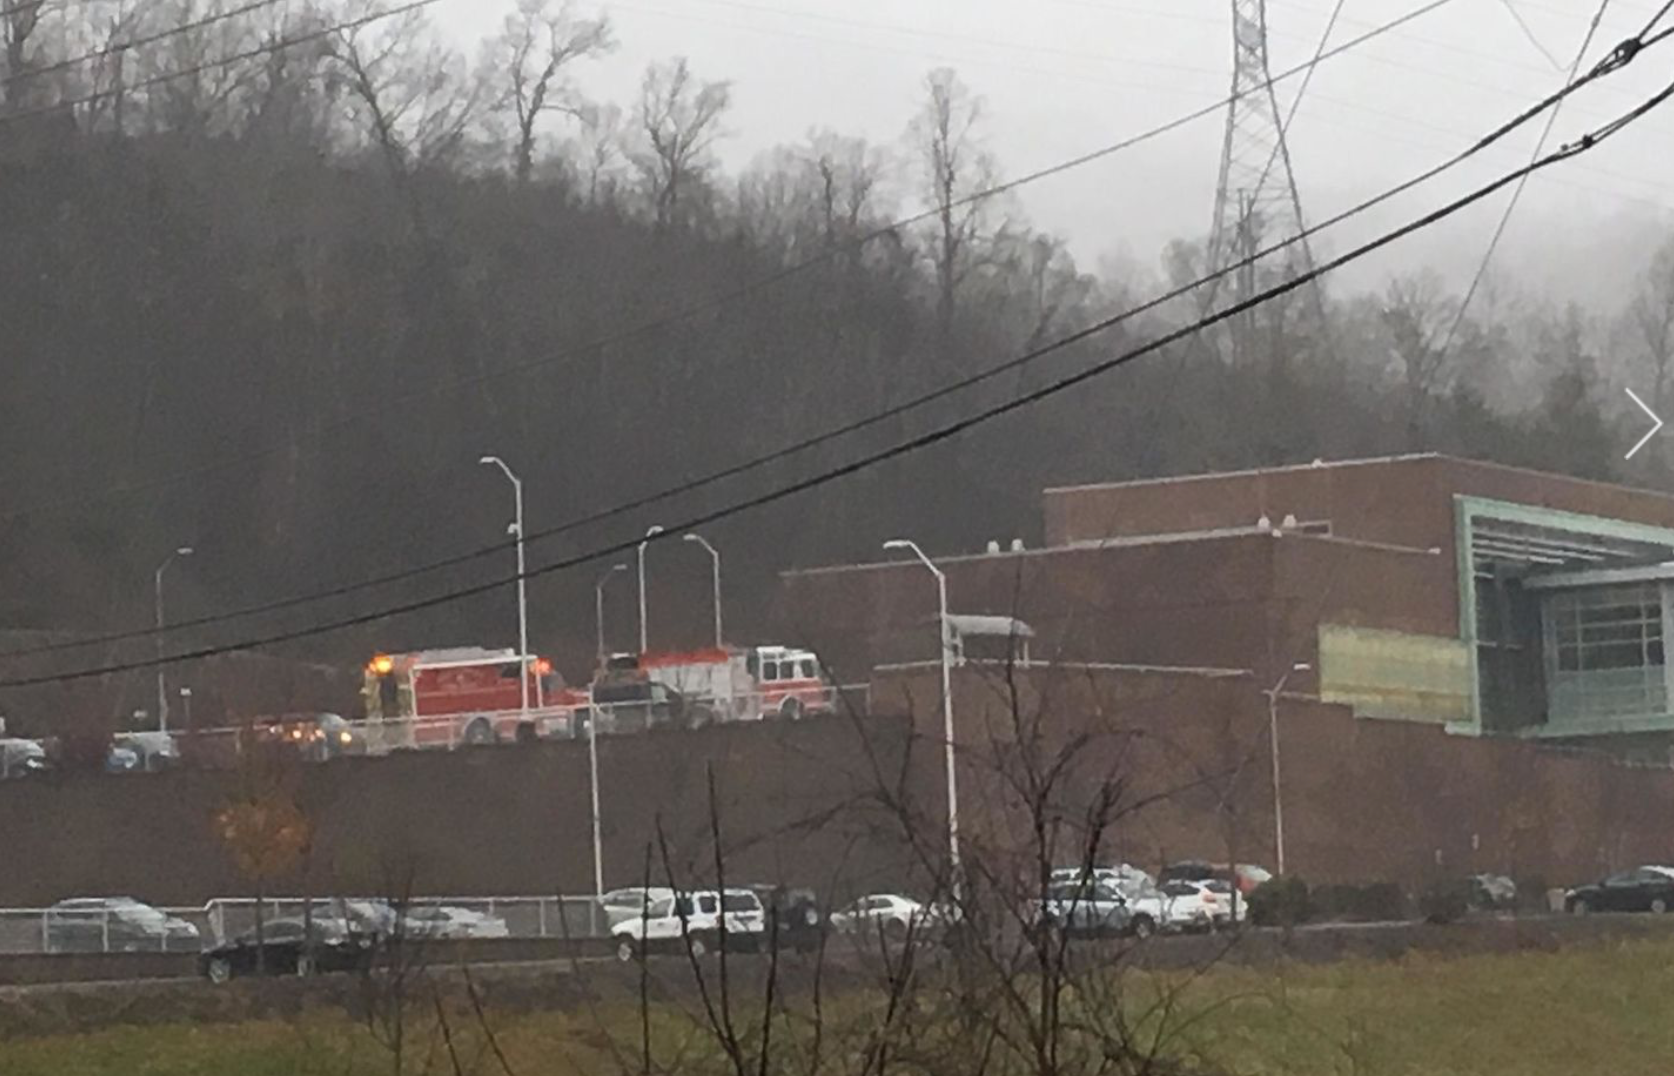 Emergency services teams respond to a possible hazardous materials incident at Western Carolina University on 6 February, 2020